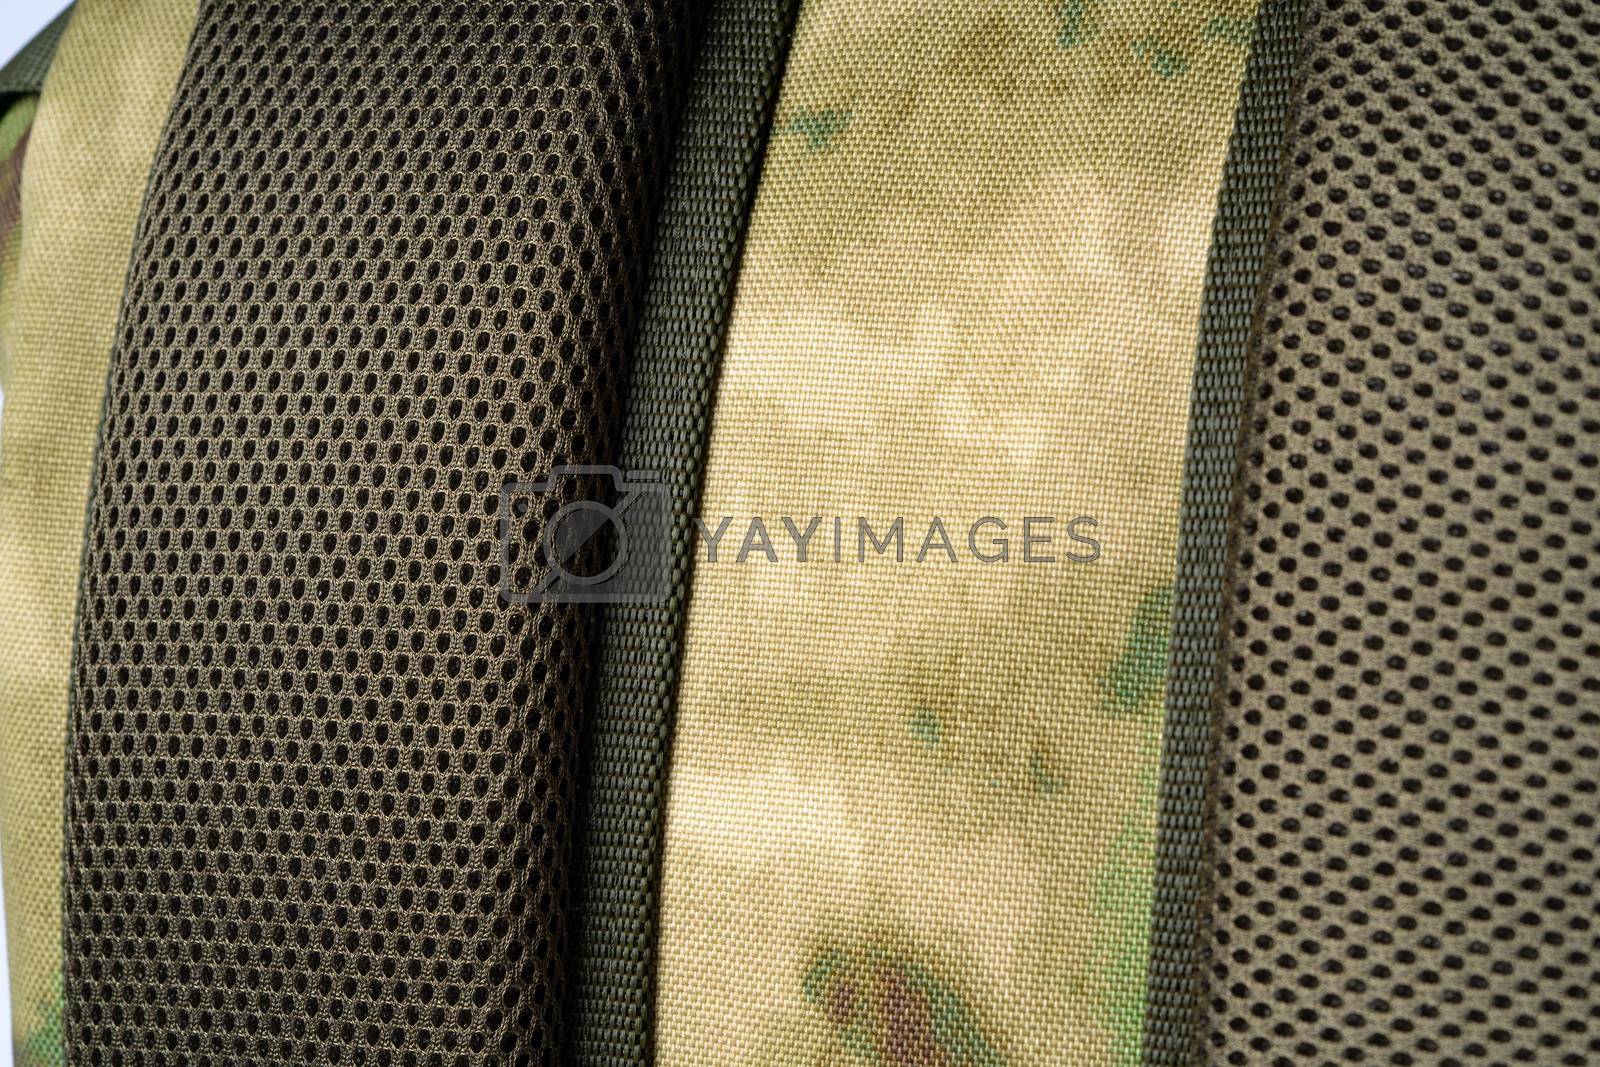 Royalty free image of Close up still life of a green army tactical backpack by Fabrikasimf